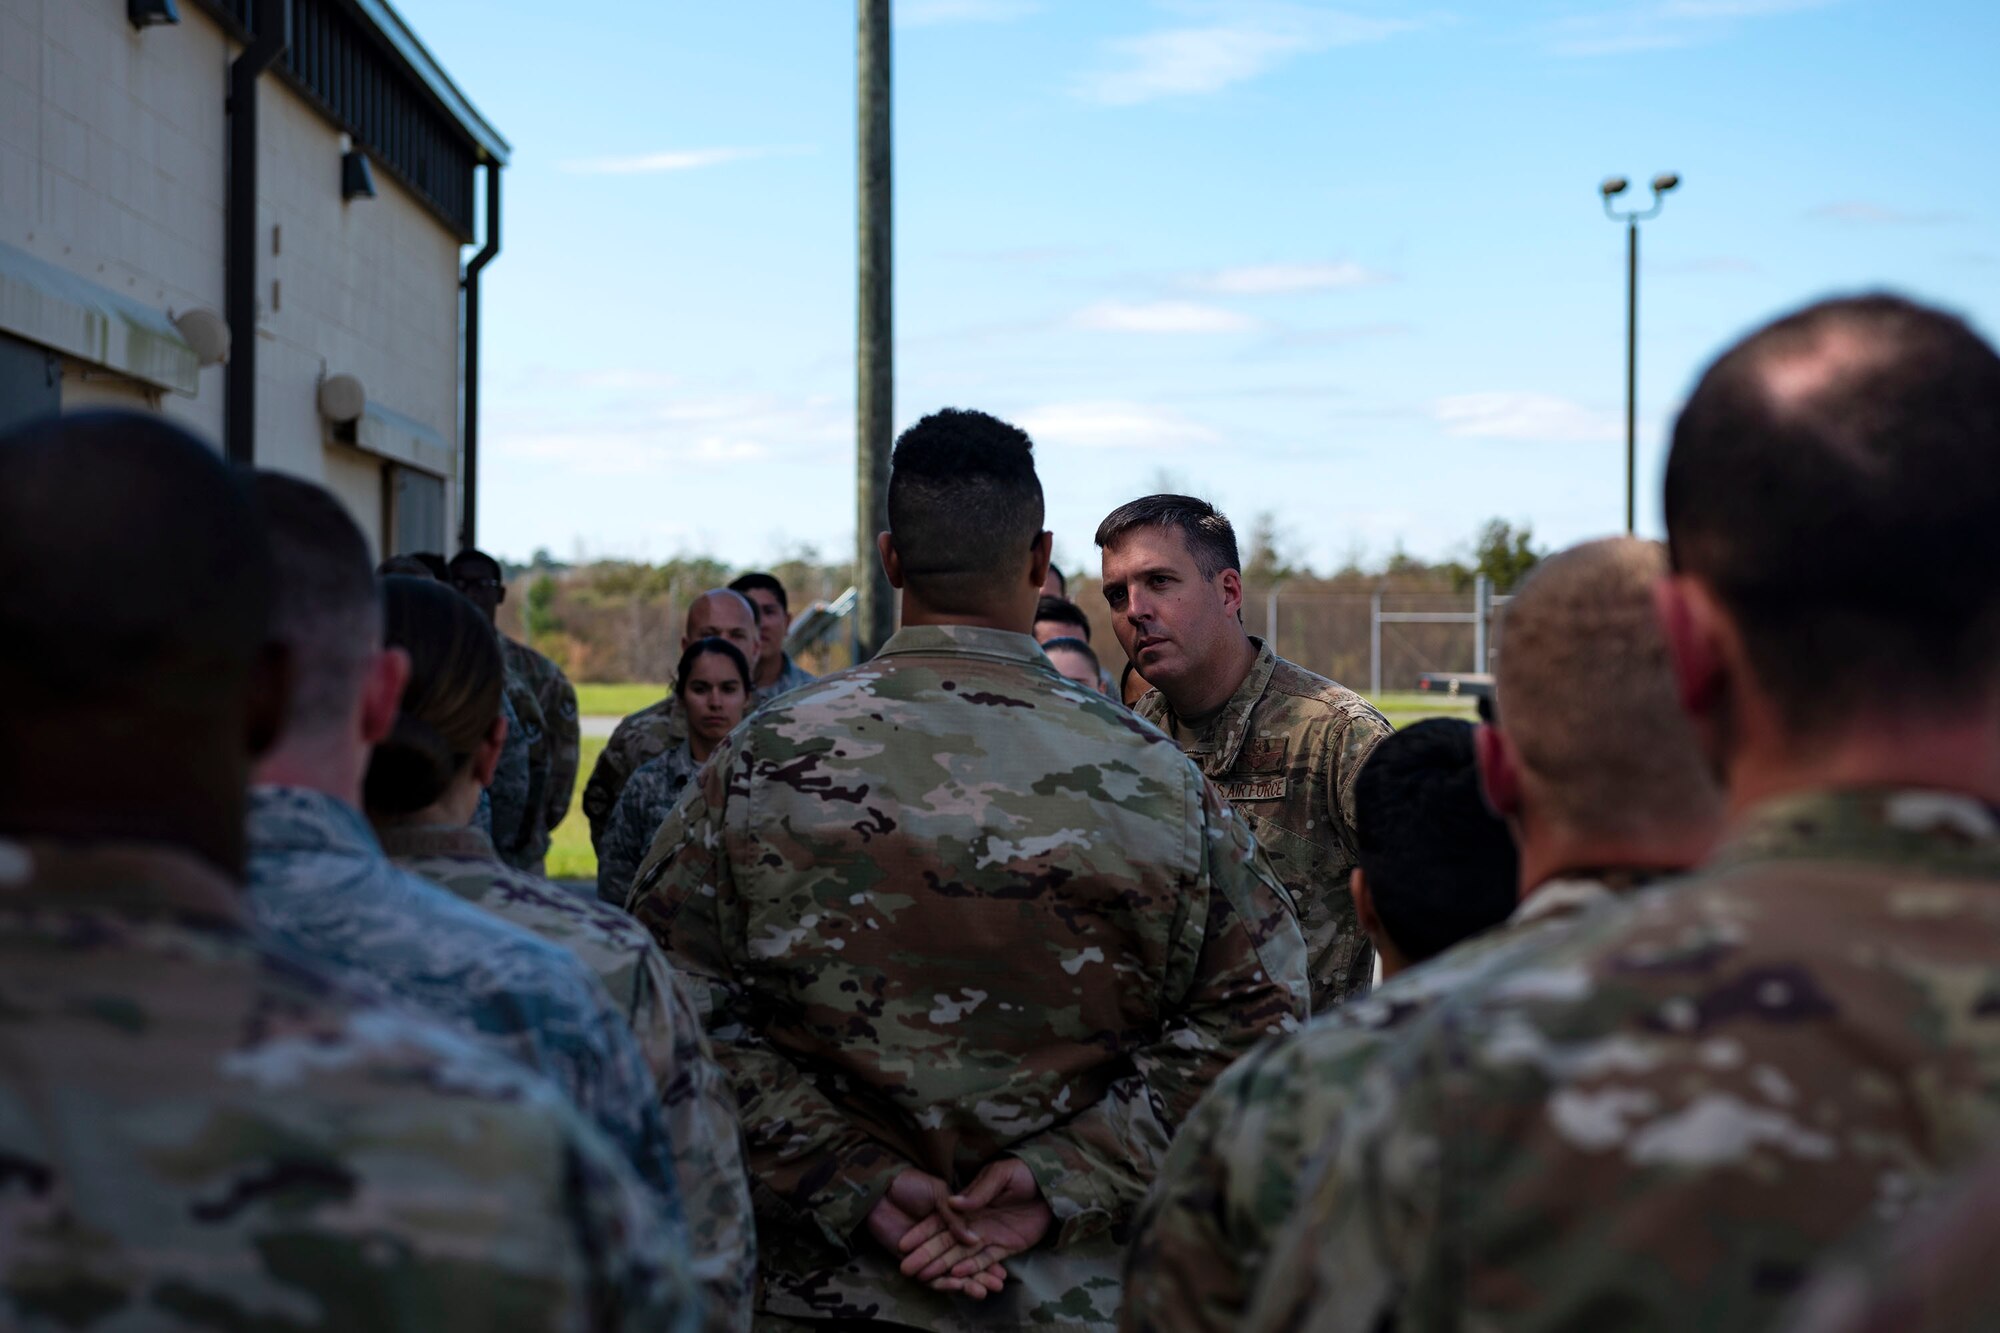 Col. Dan Walls, center, 23d Wing commander, talks with Airmen assigned to the 23d Maintenance Squadron (MXS) during an immersion tour Oct. 28, 2019, at Moody Air Force Base, Ga. Walls toured the 23d MXS munitions flight facilities, where the Airmen showcased their squadron and mission. This gave Walls the opportunity to see how 23d MXS improves deployability and ensures mission readiness. (U.S. Air Force photo by Senior Airman Erick Requadt)